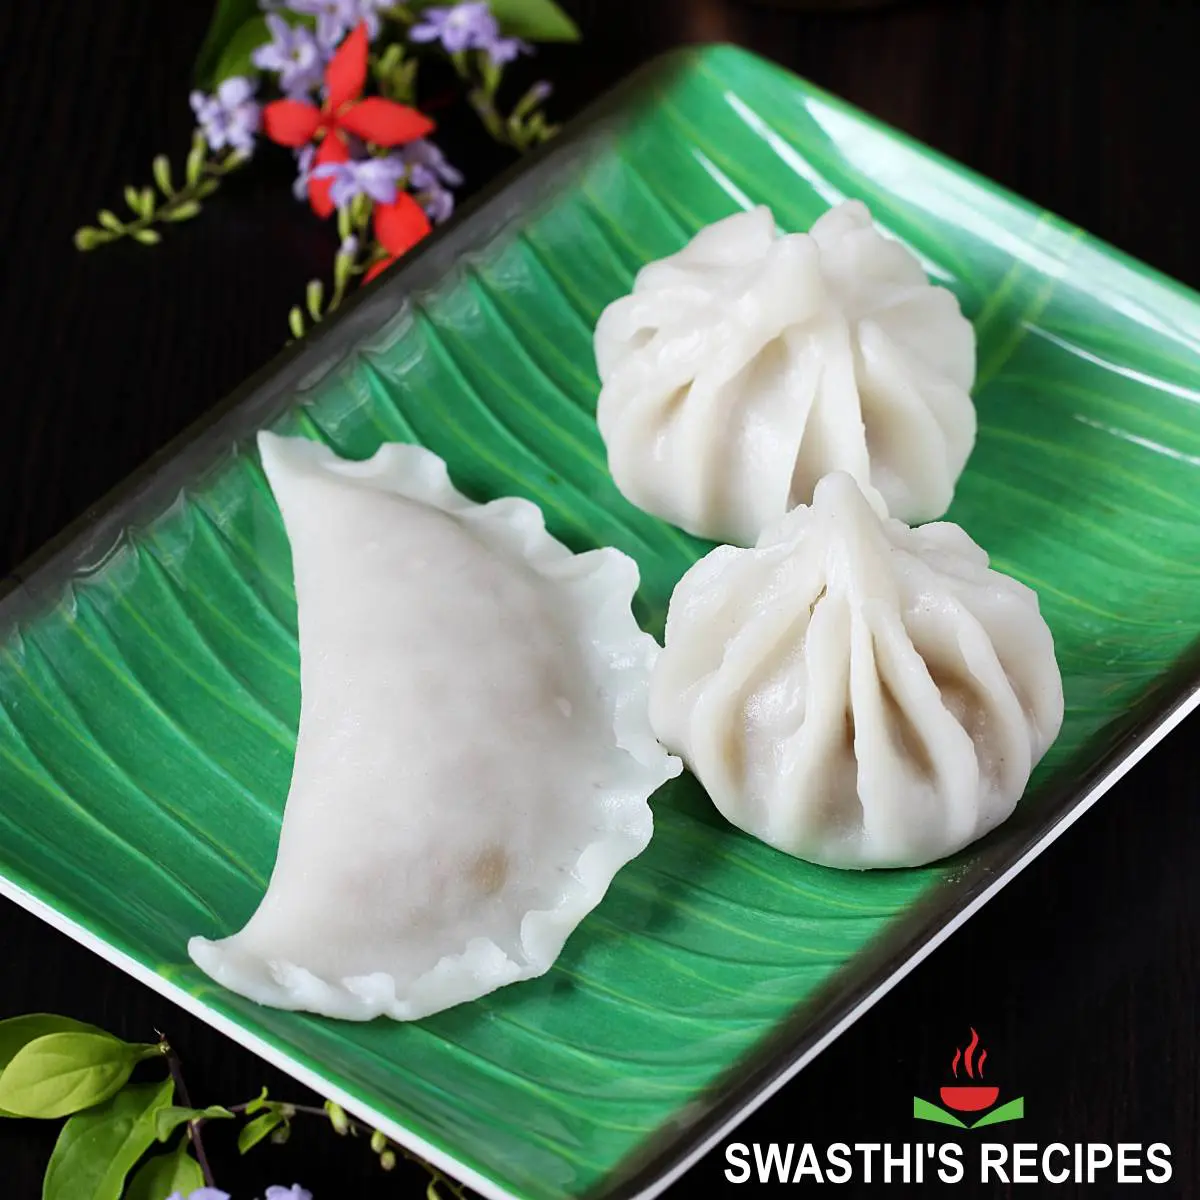 modak recipe made with & without mould